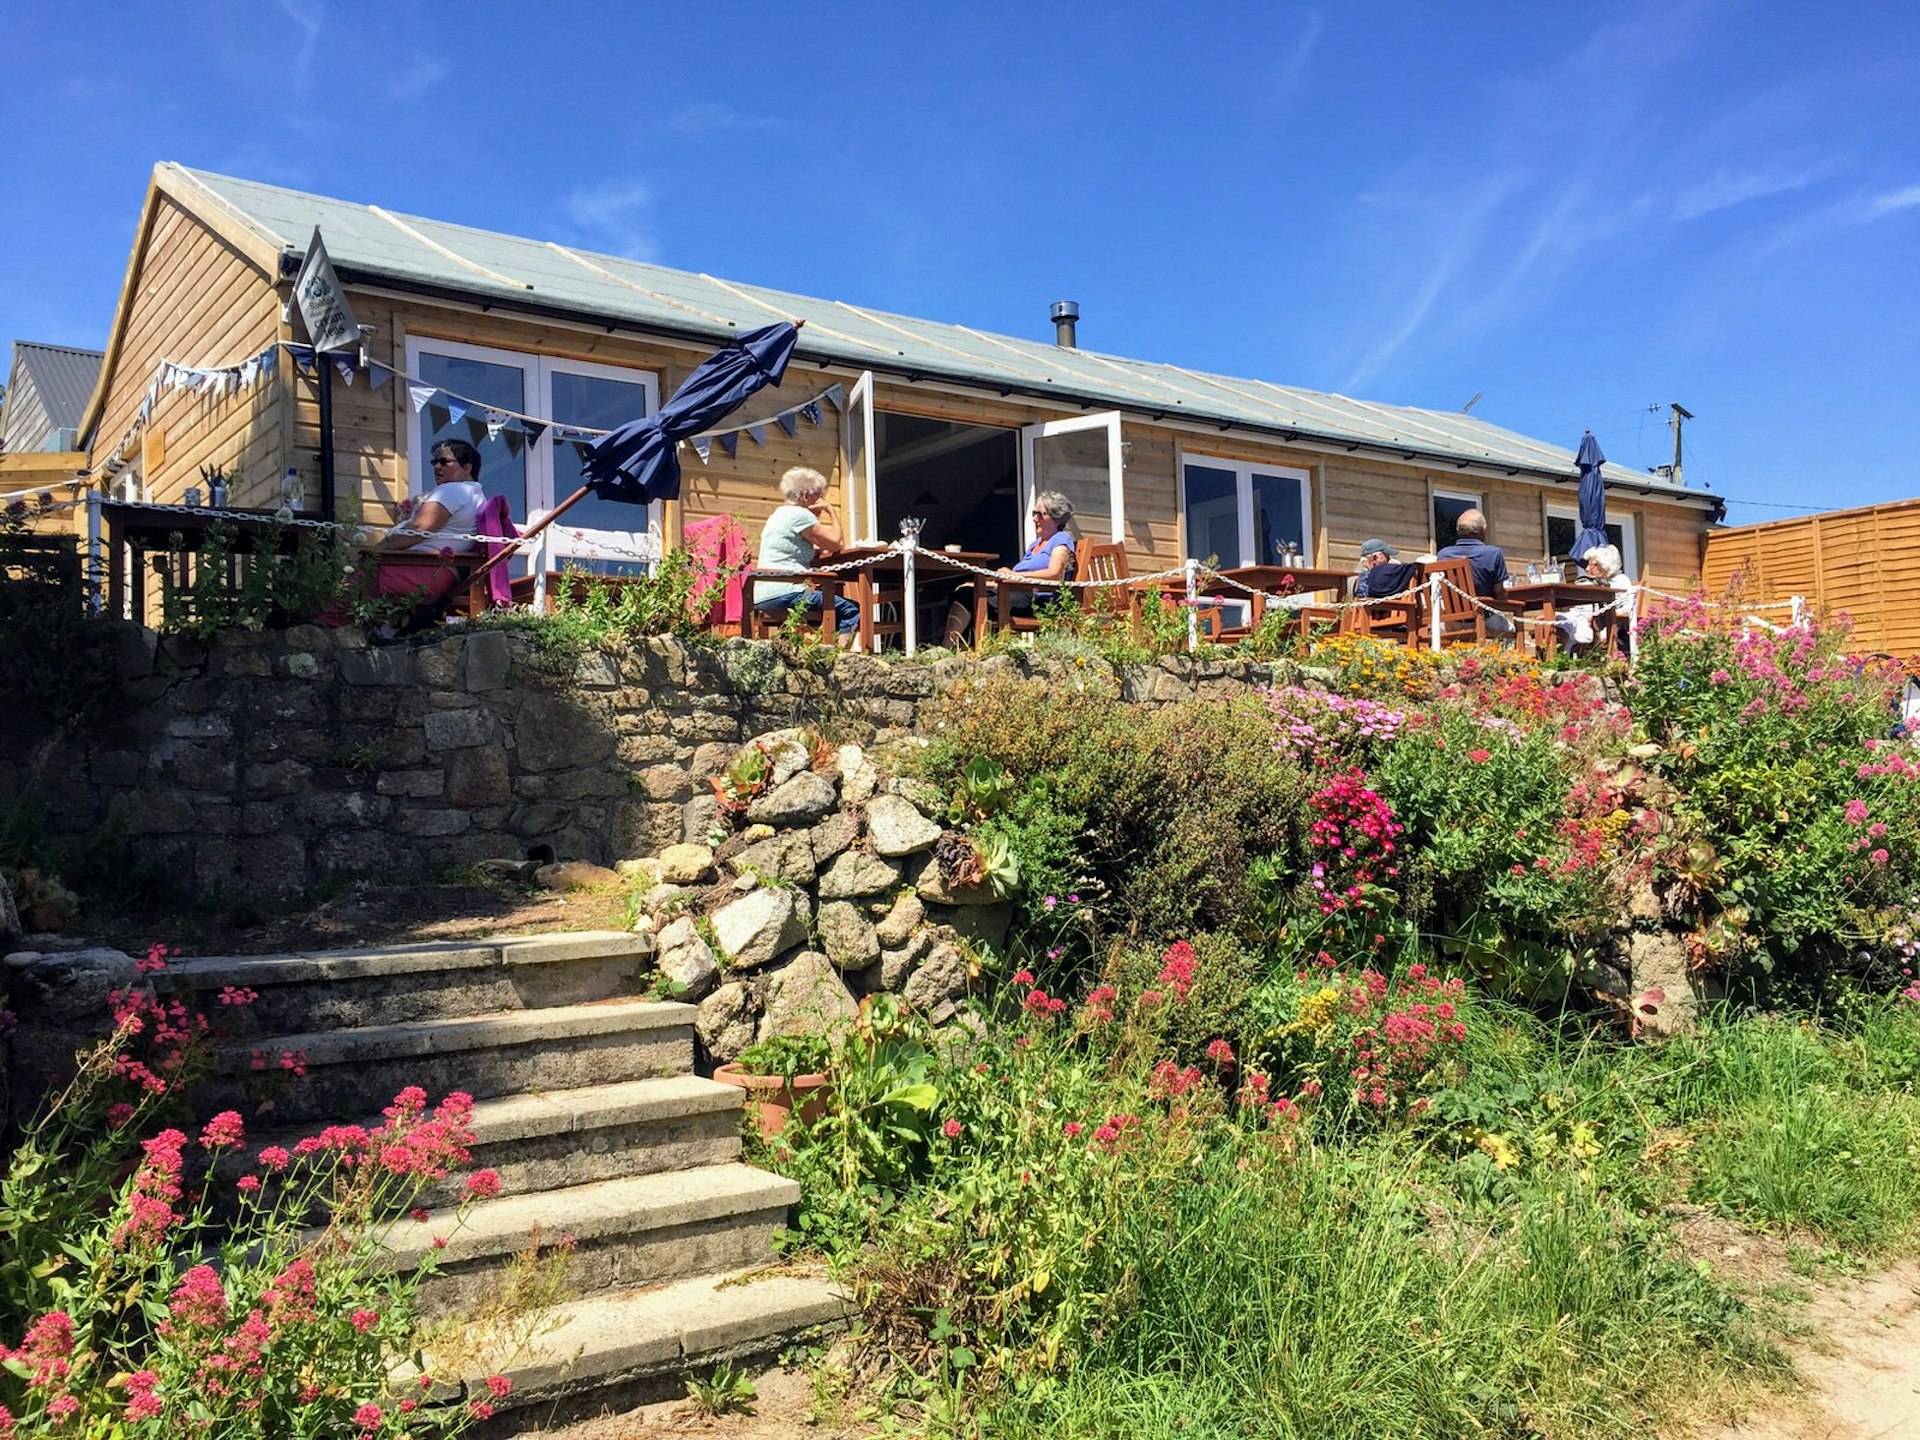 People on the terrace outside Longstone Lodge and Cafe, St Mary's, Isles of Scilly, England, UK © James Kay / Lonely Planet